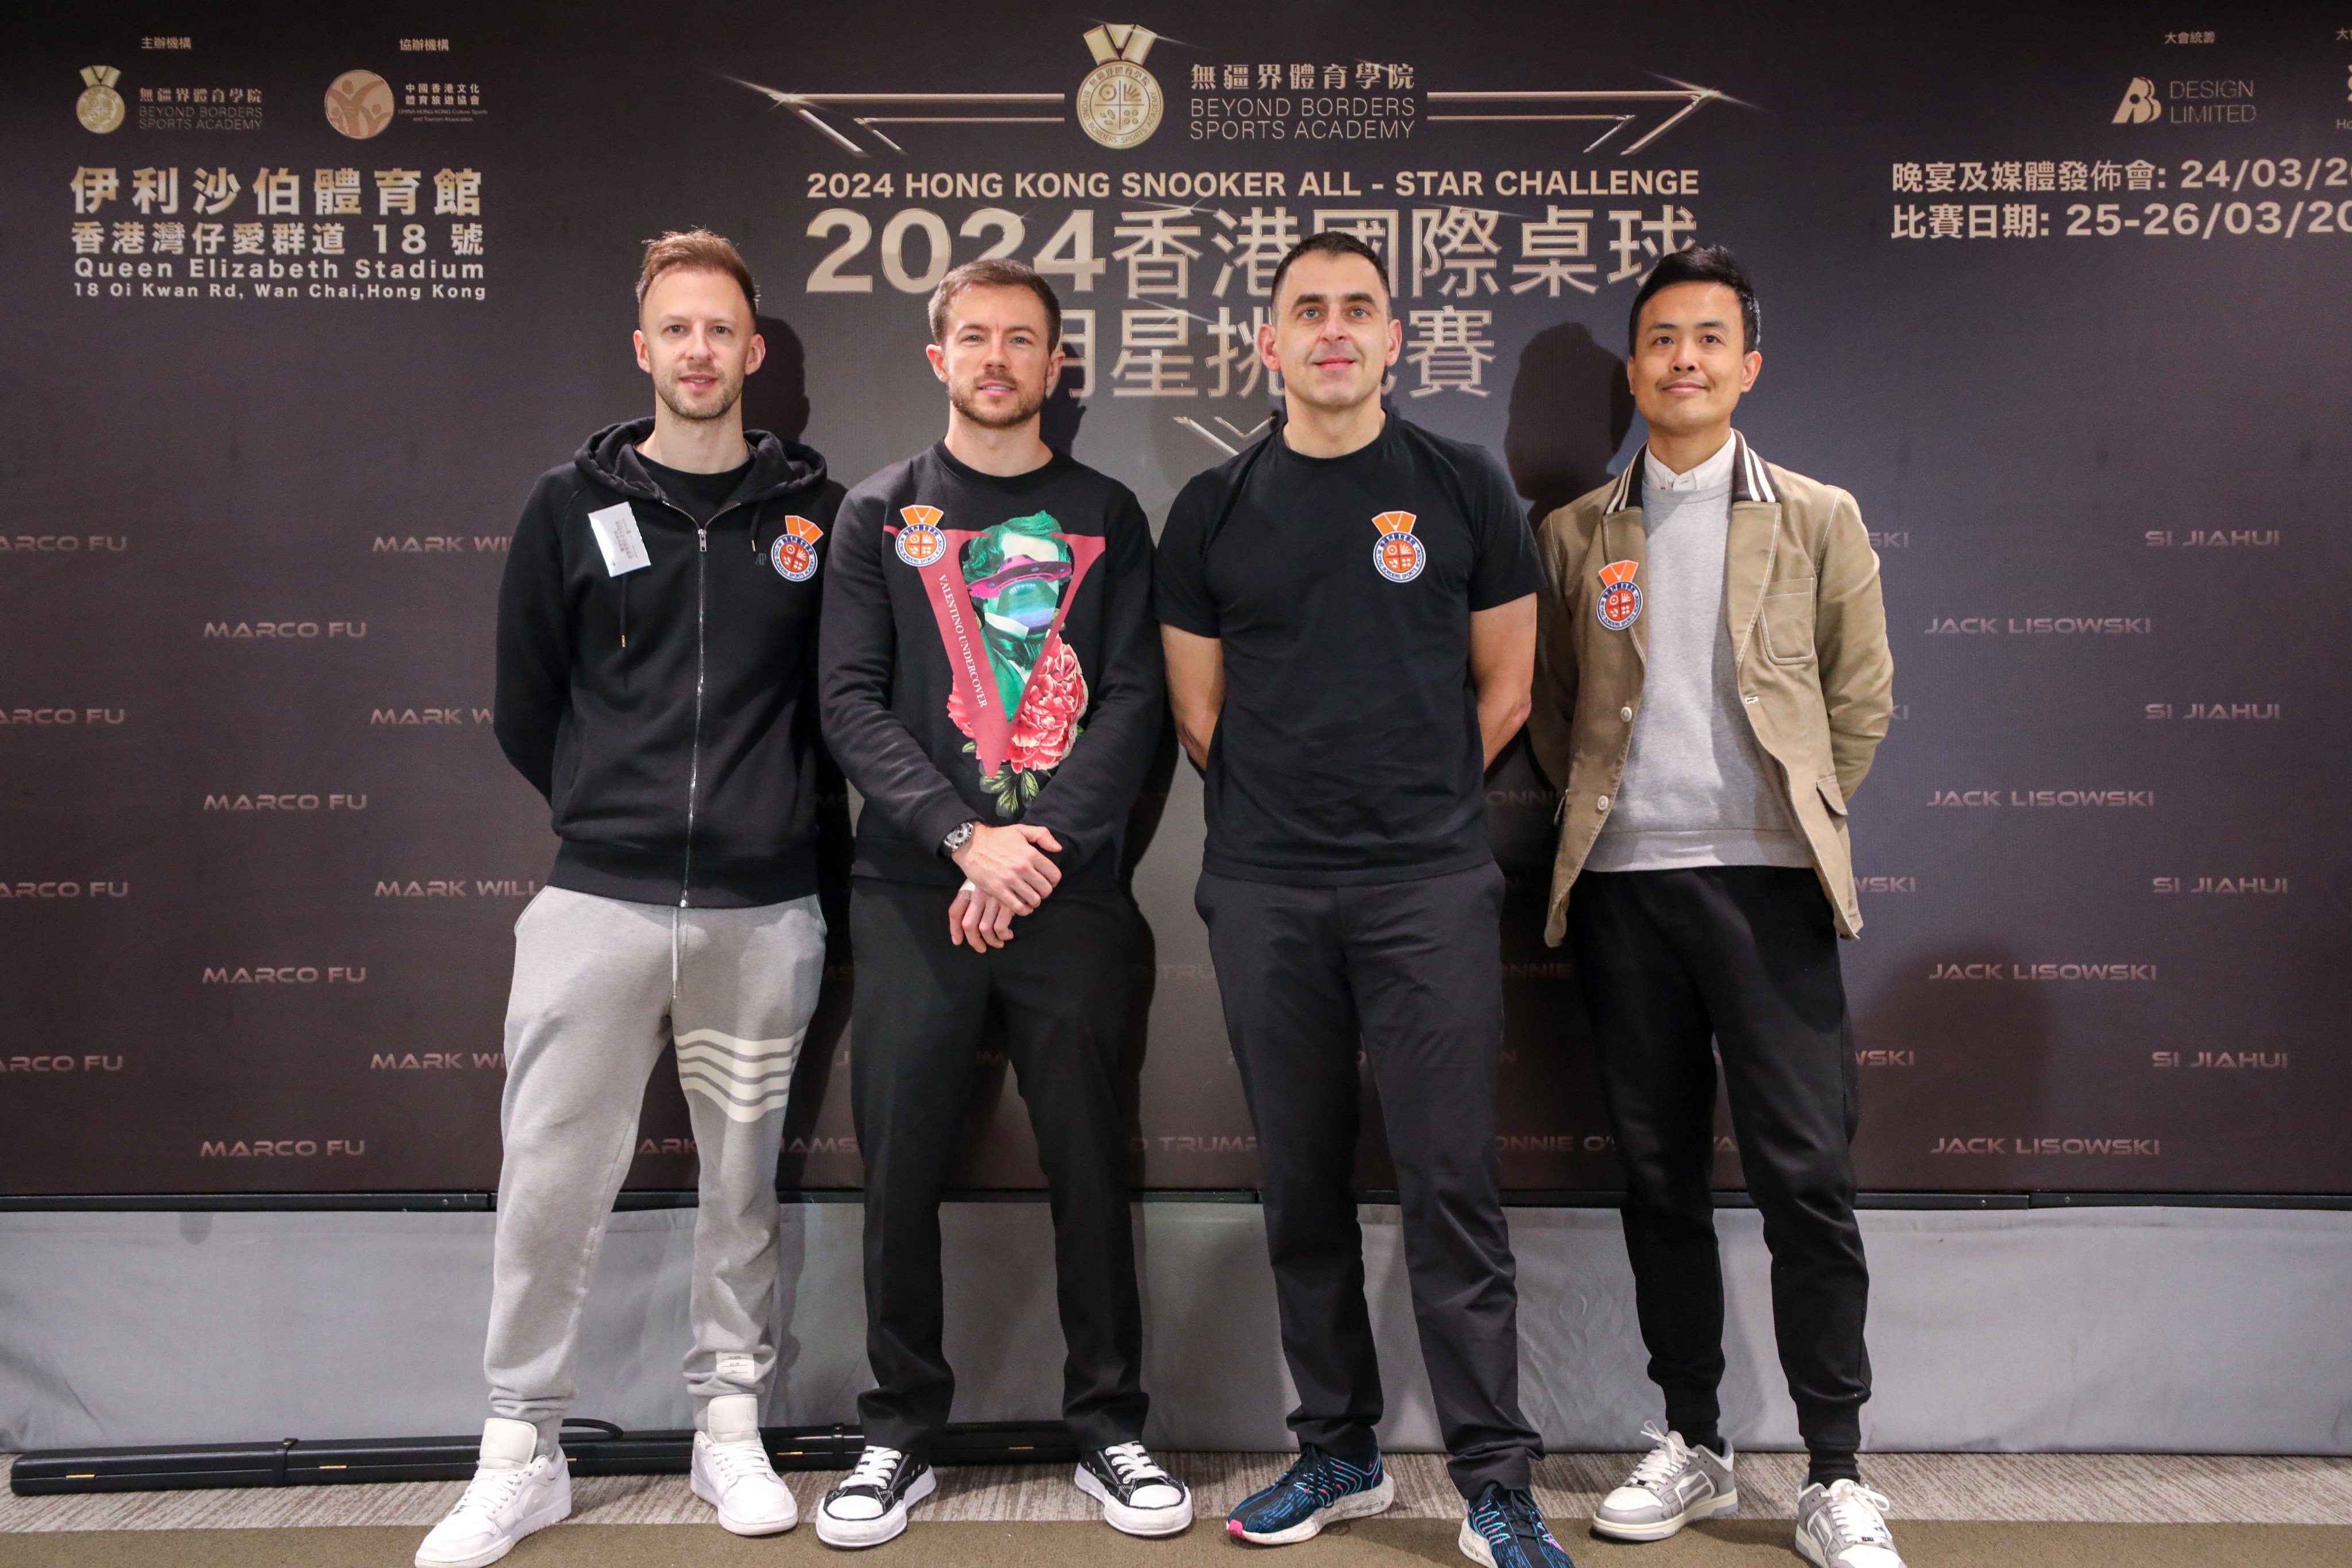 Snooker stars (from left), Judd Trump, Jack Lisowski, Ronnie O’Sullivan and Marco Fu at a press conference in Hung Hom. Photo: Xiaomei Chen